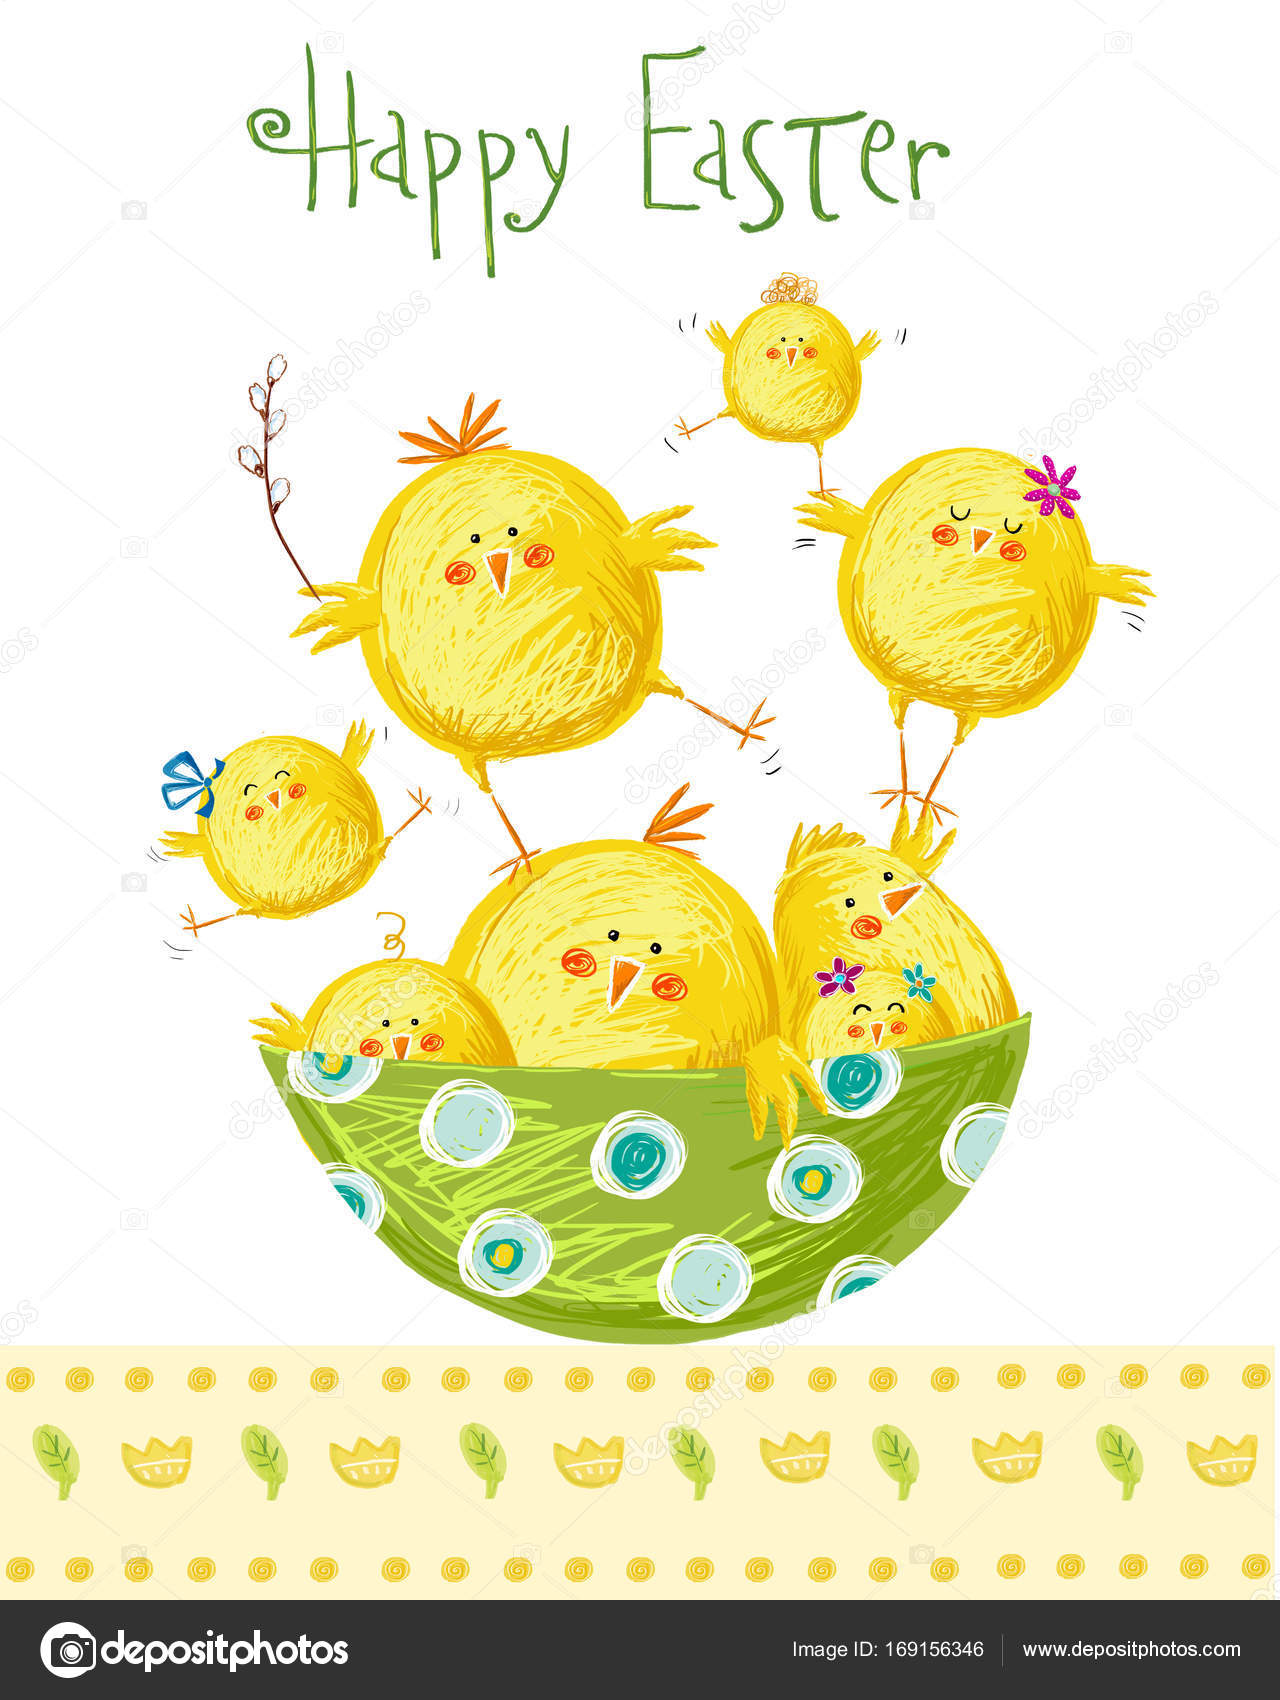 SALE Easter Yellow Baby Chicks DIGITAL Download Purple Lavender Pink Spring Flowers Holiday Greeting Printable Craft Image